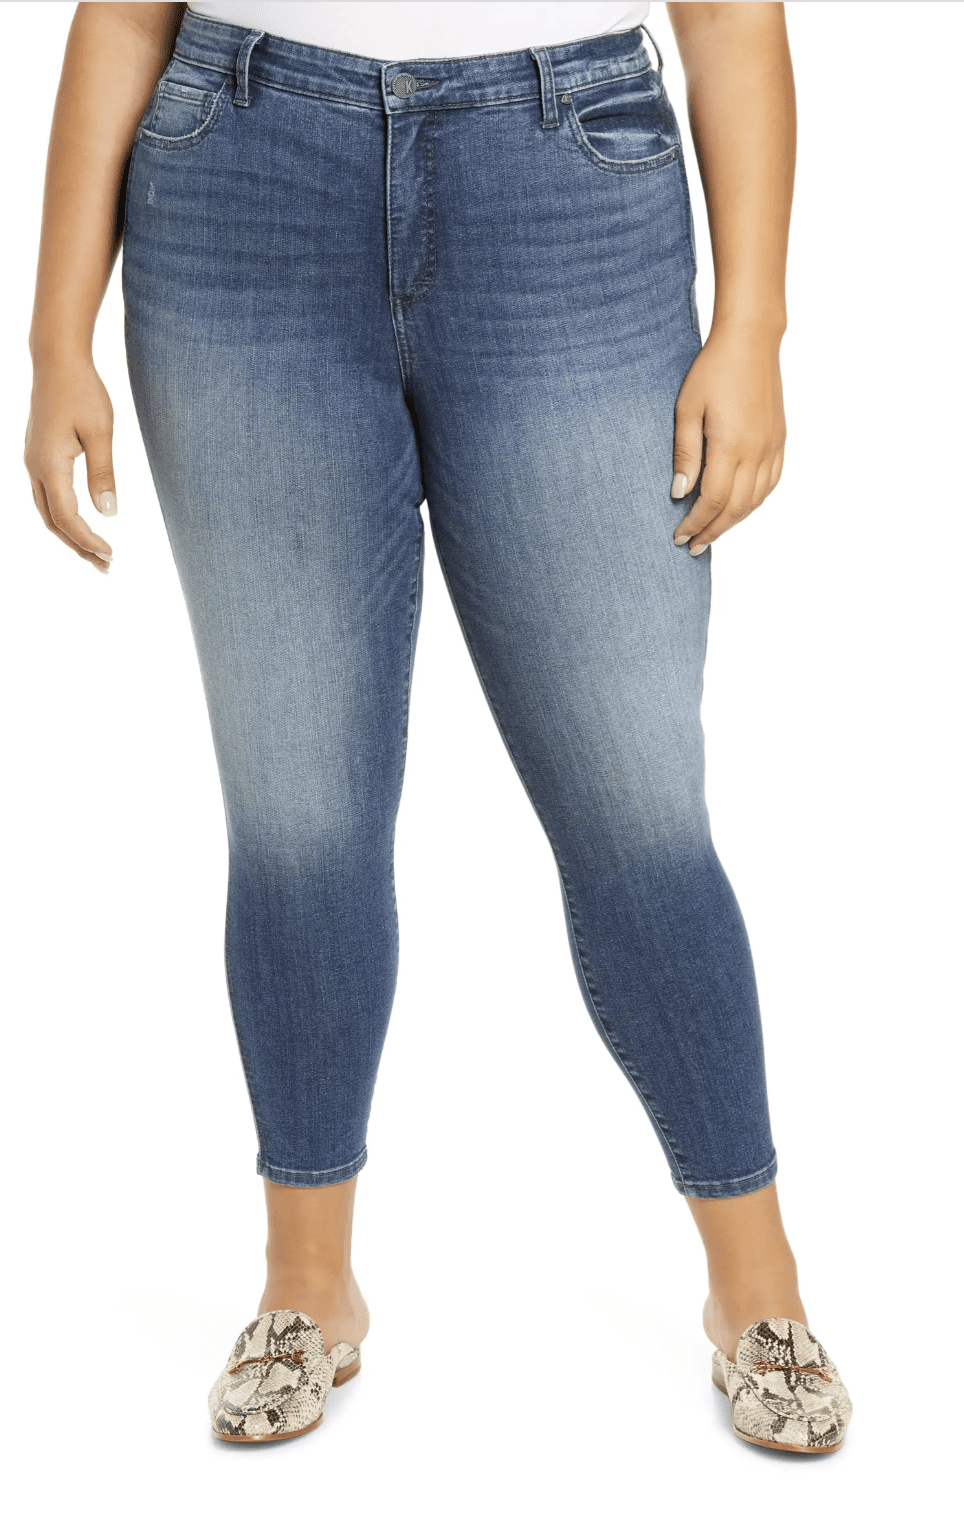 Kut from the Kloth Plus size jeans